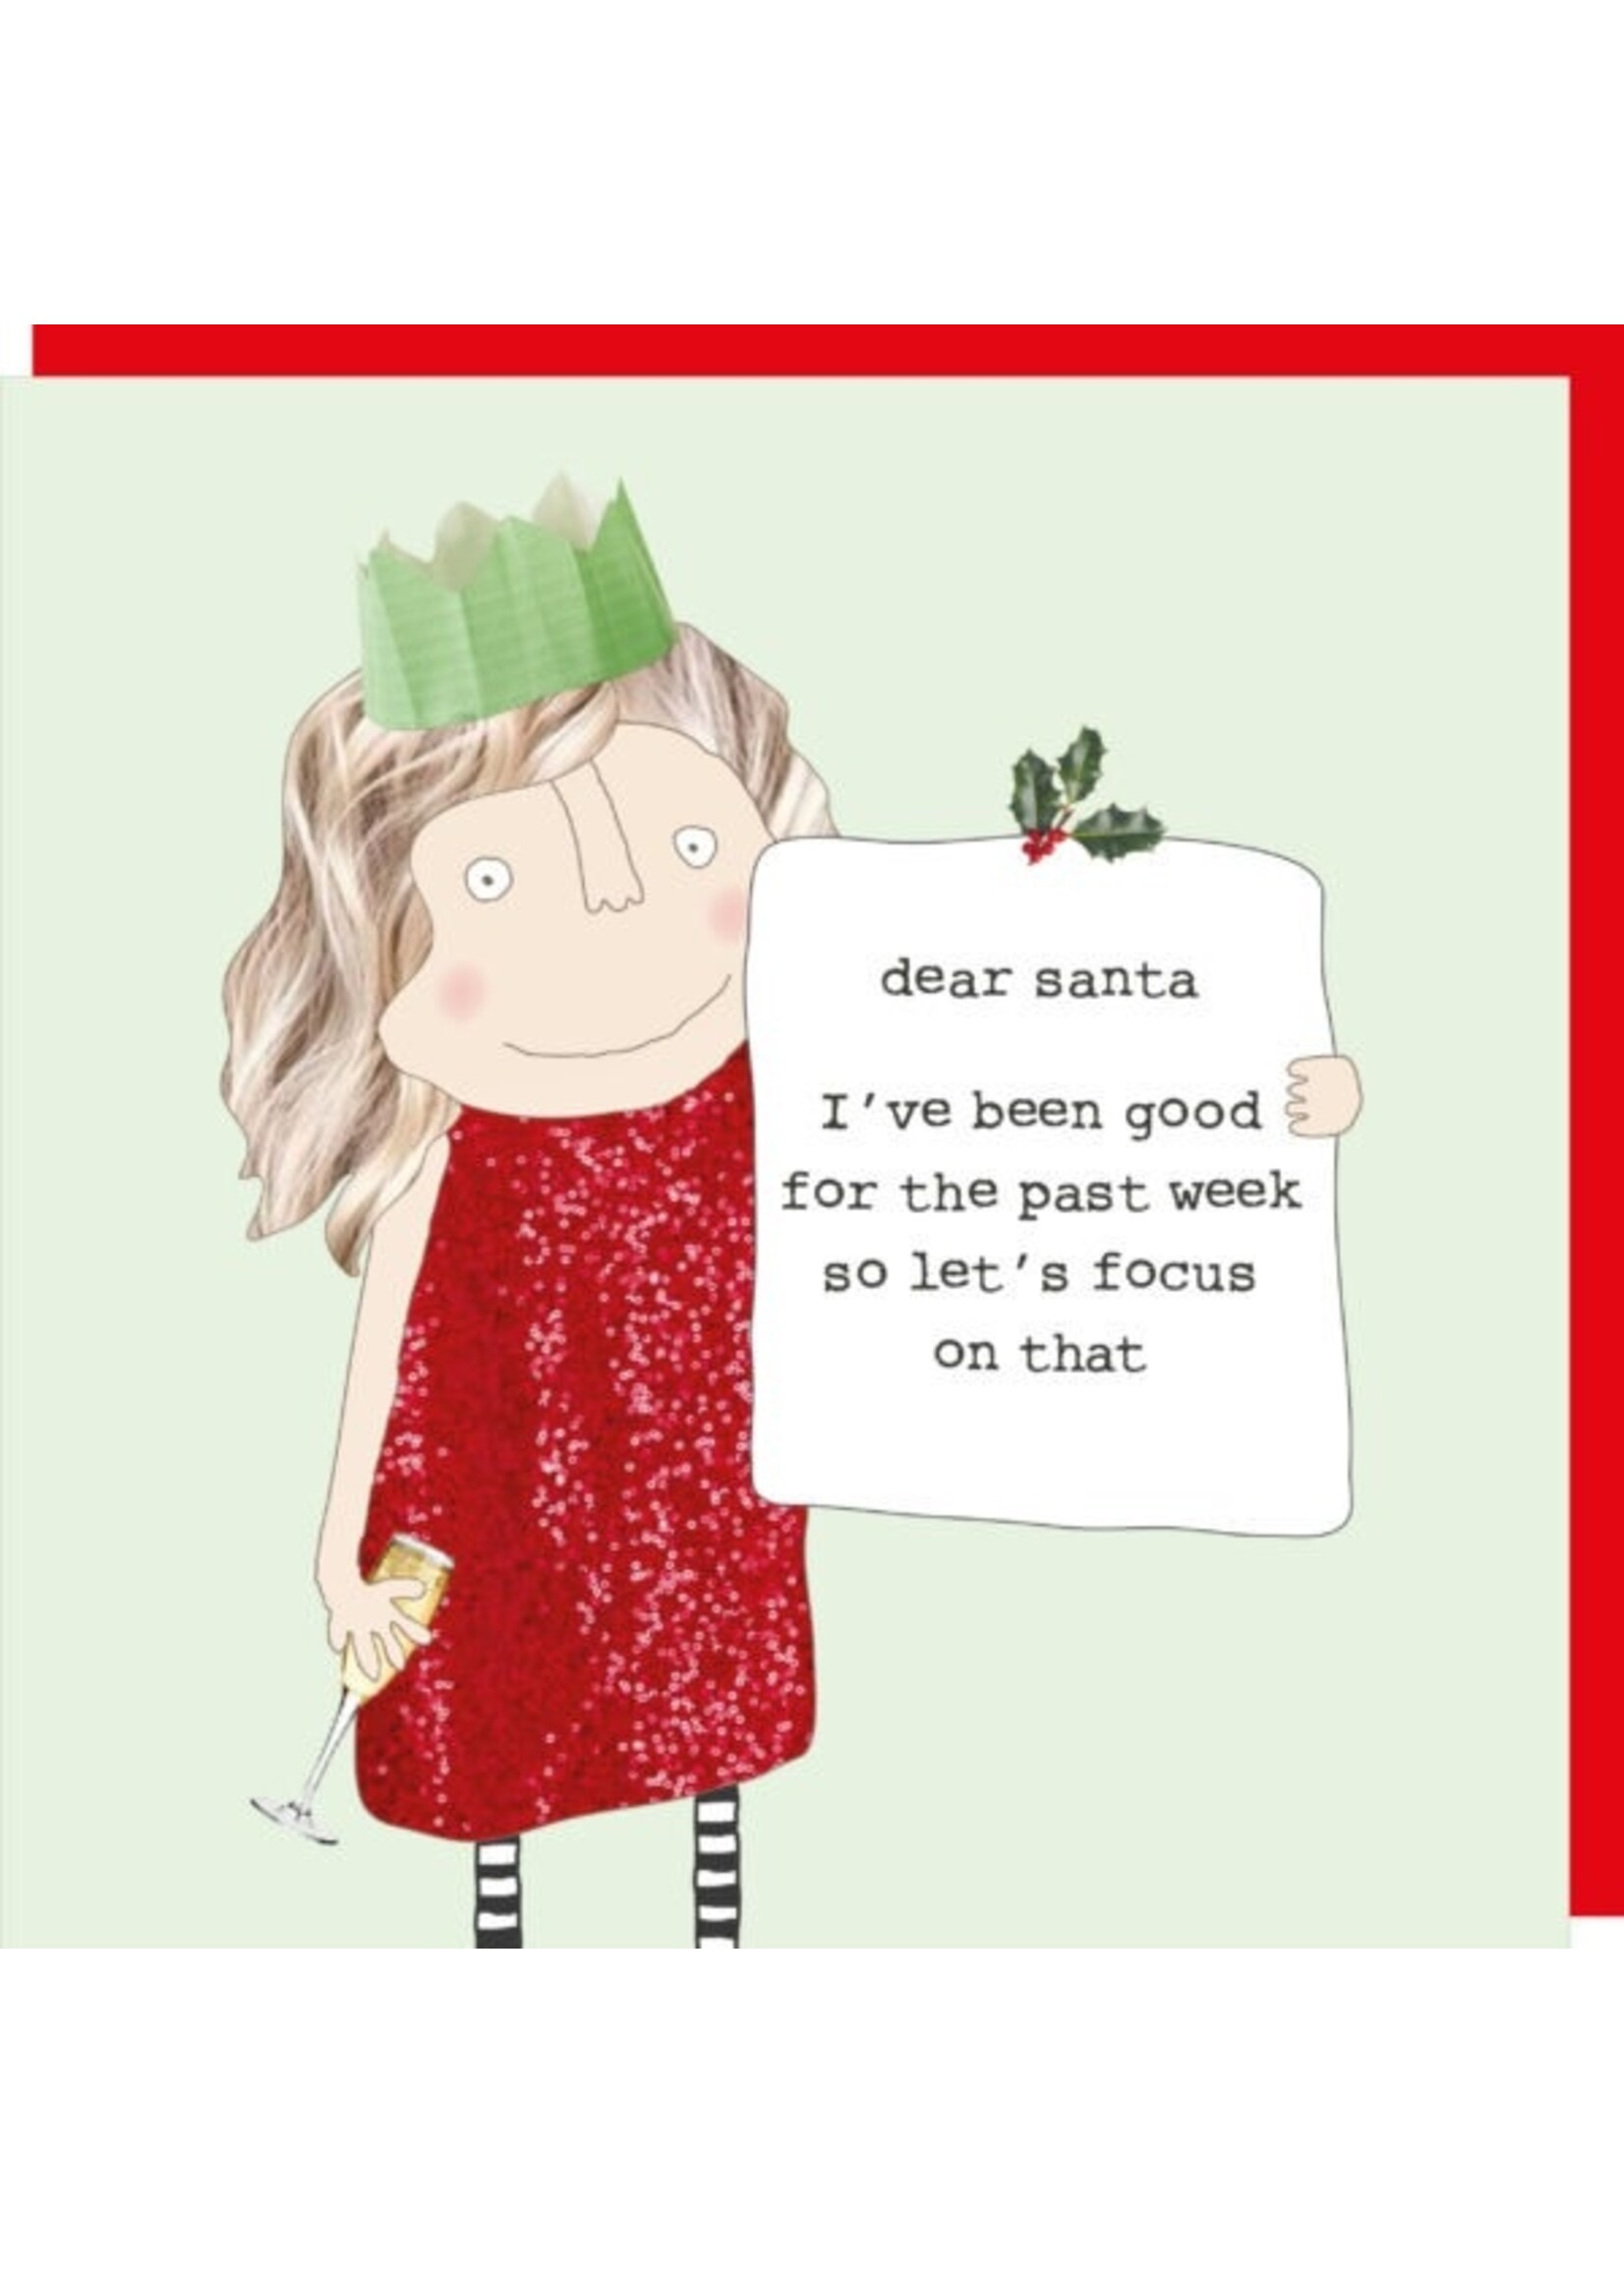 Rosie Made a Thing Santa Been Good - Rosie Made a Thing  Greeting Card